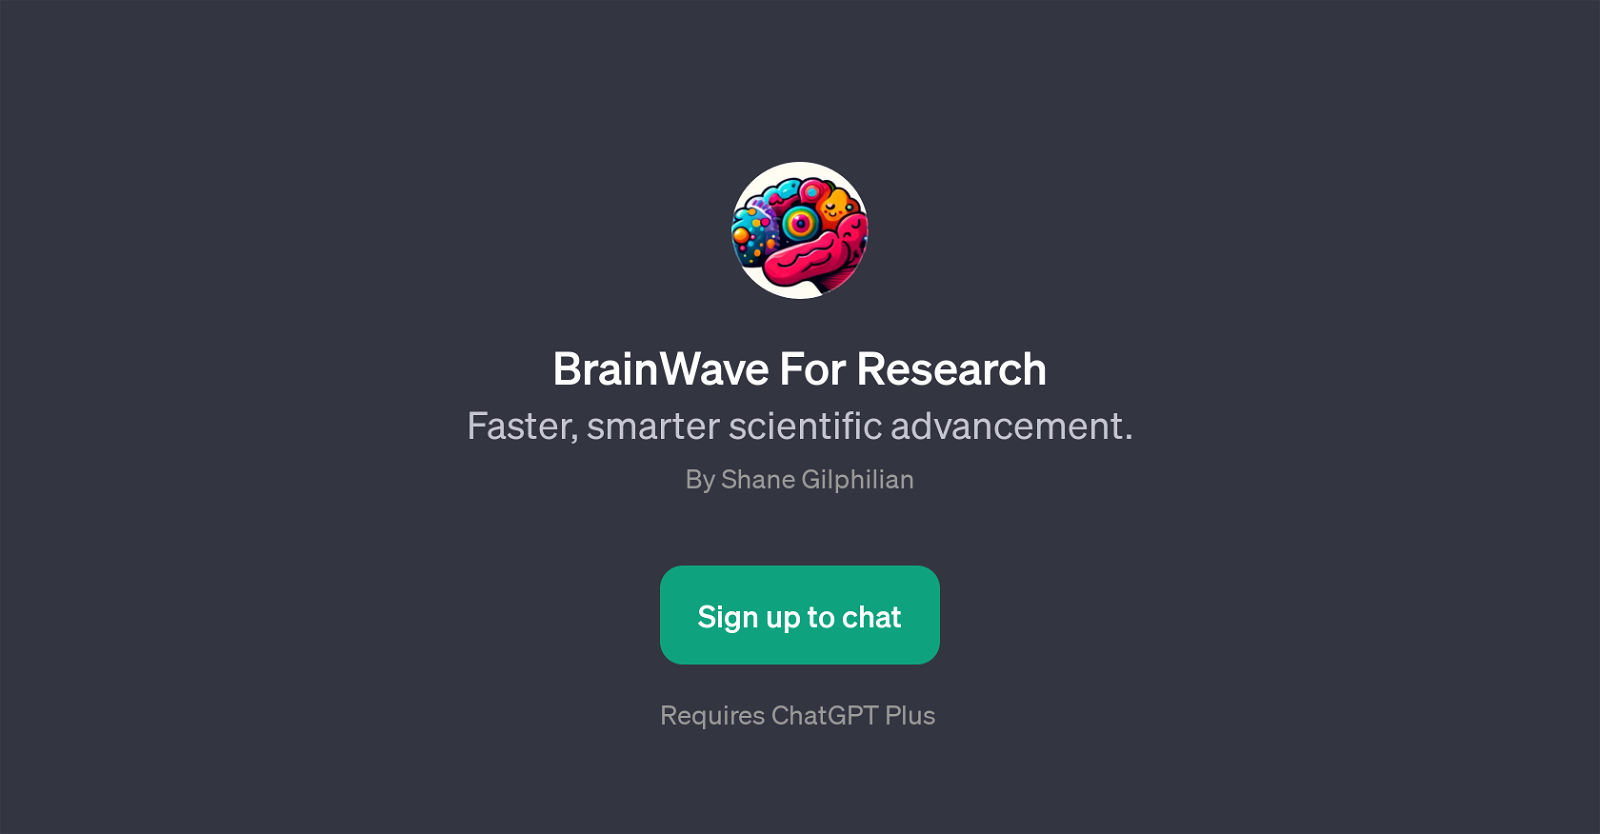 BrainWave For Research website